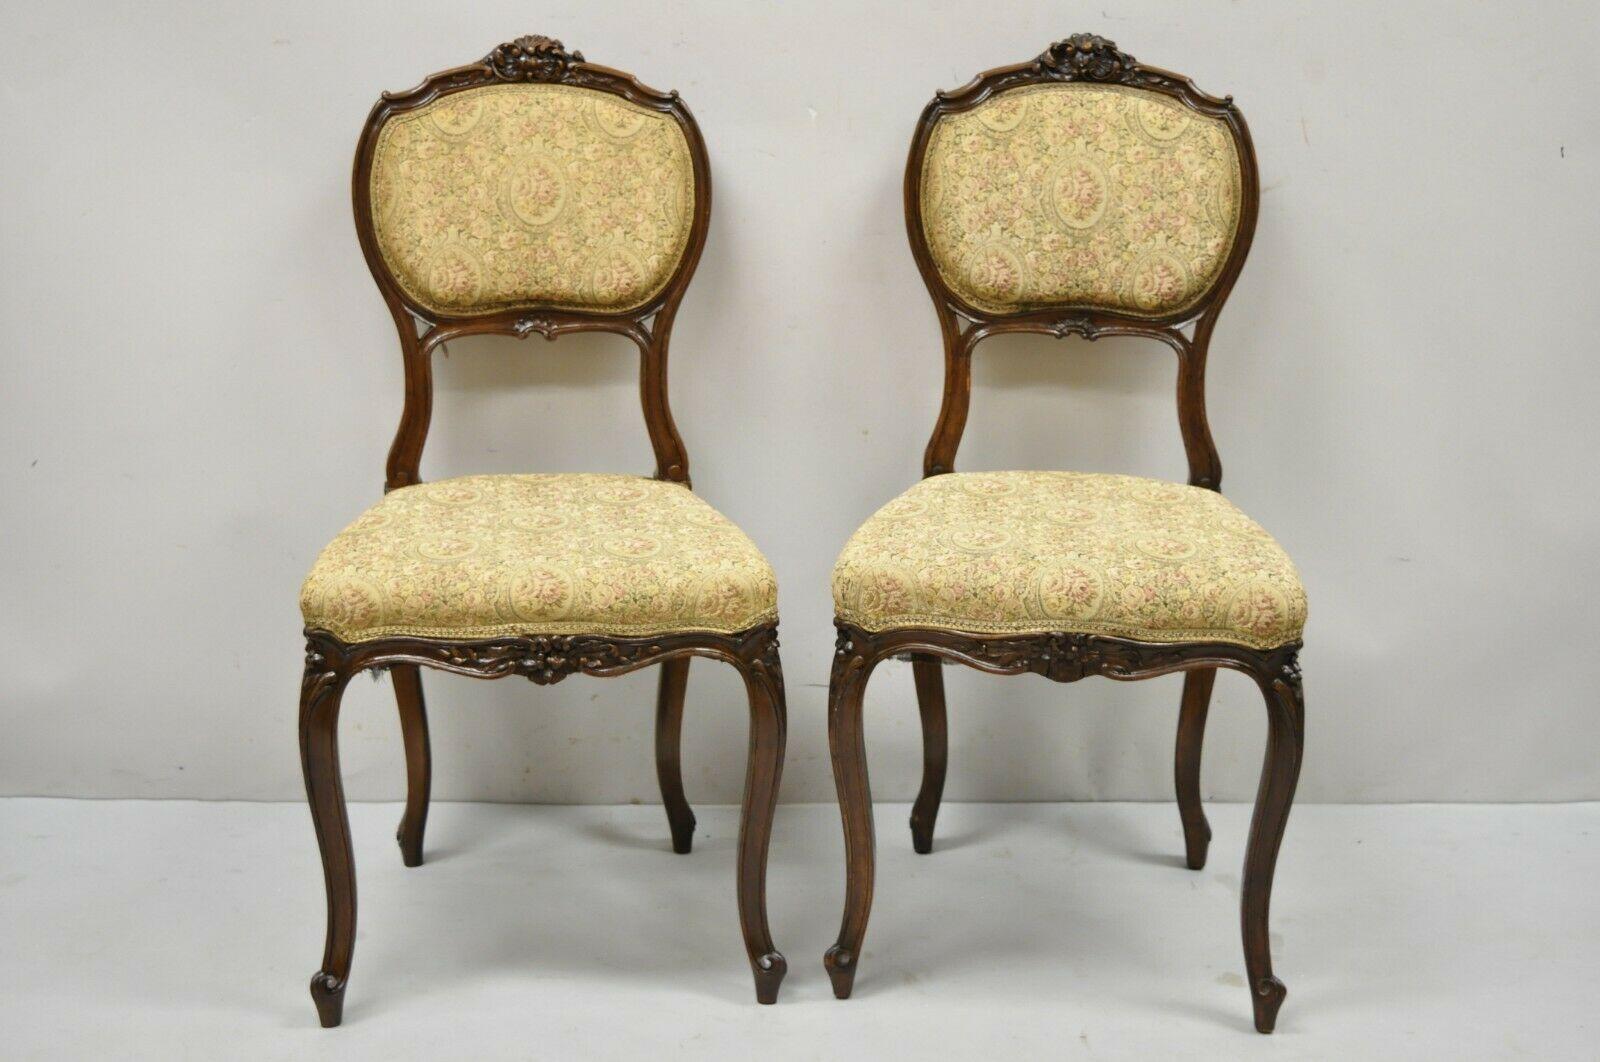 Antique French Victorian Mahogany Upholstered Parlor Side Chairs, Set of 4 For Sale 6